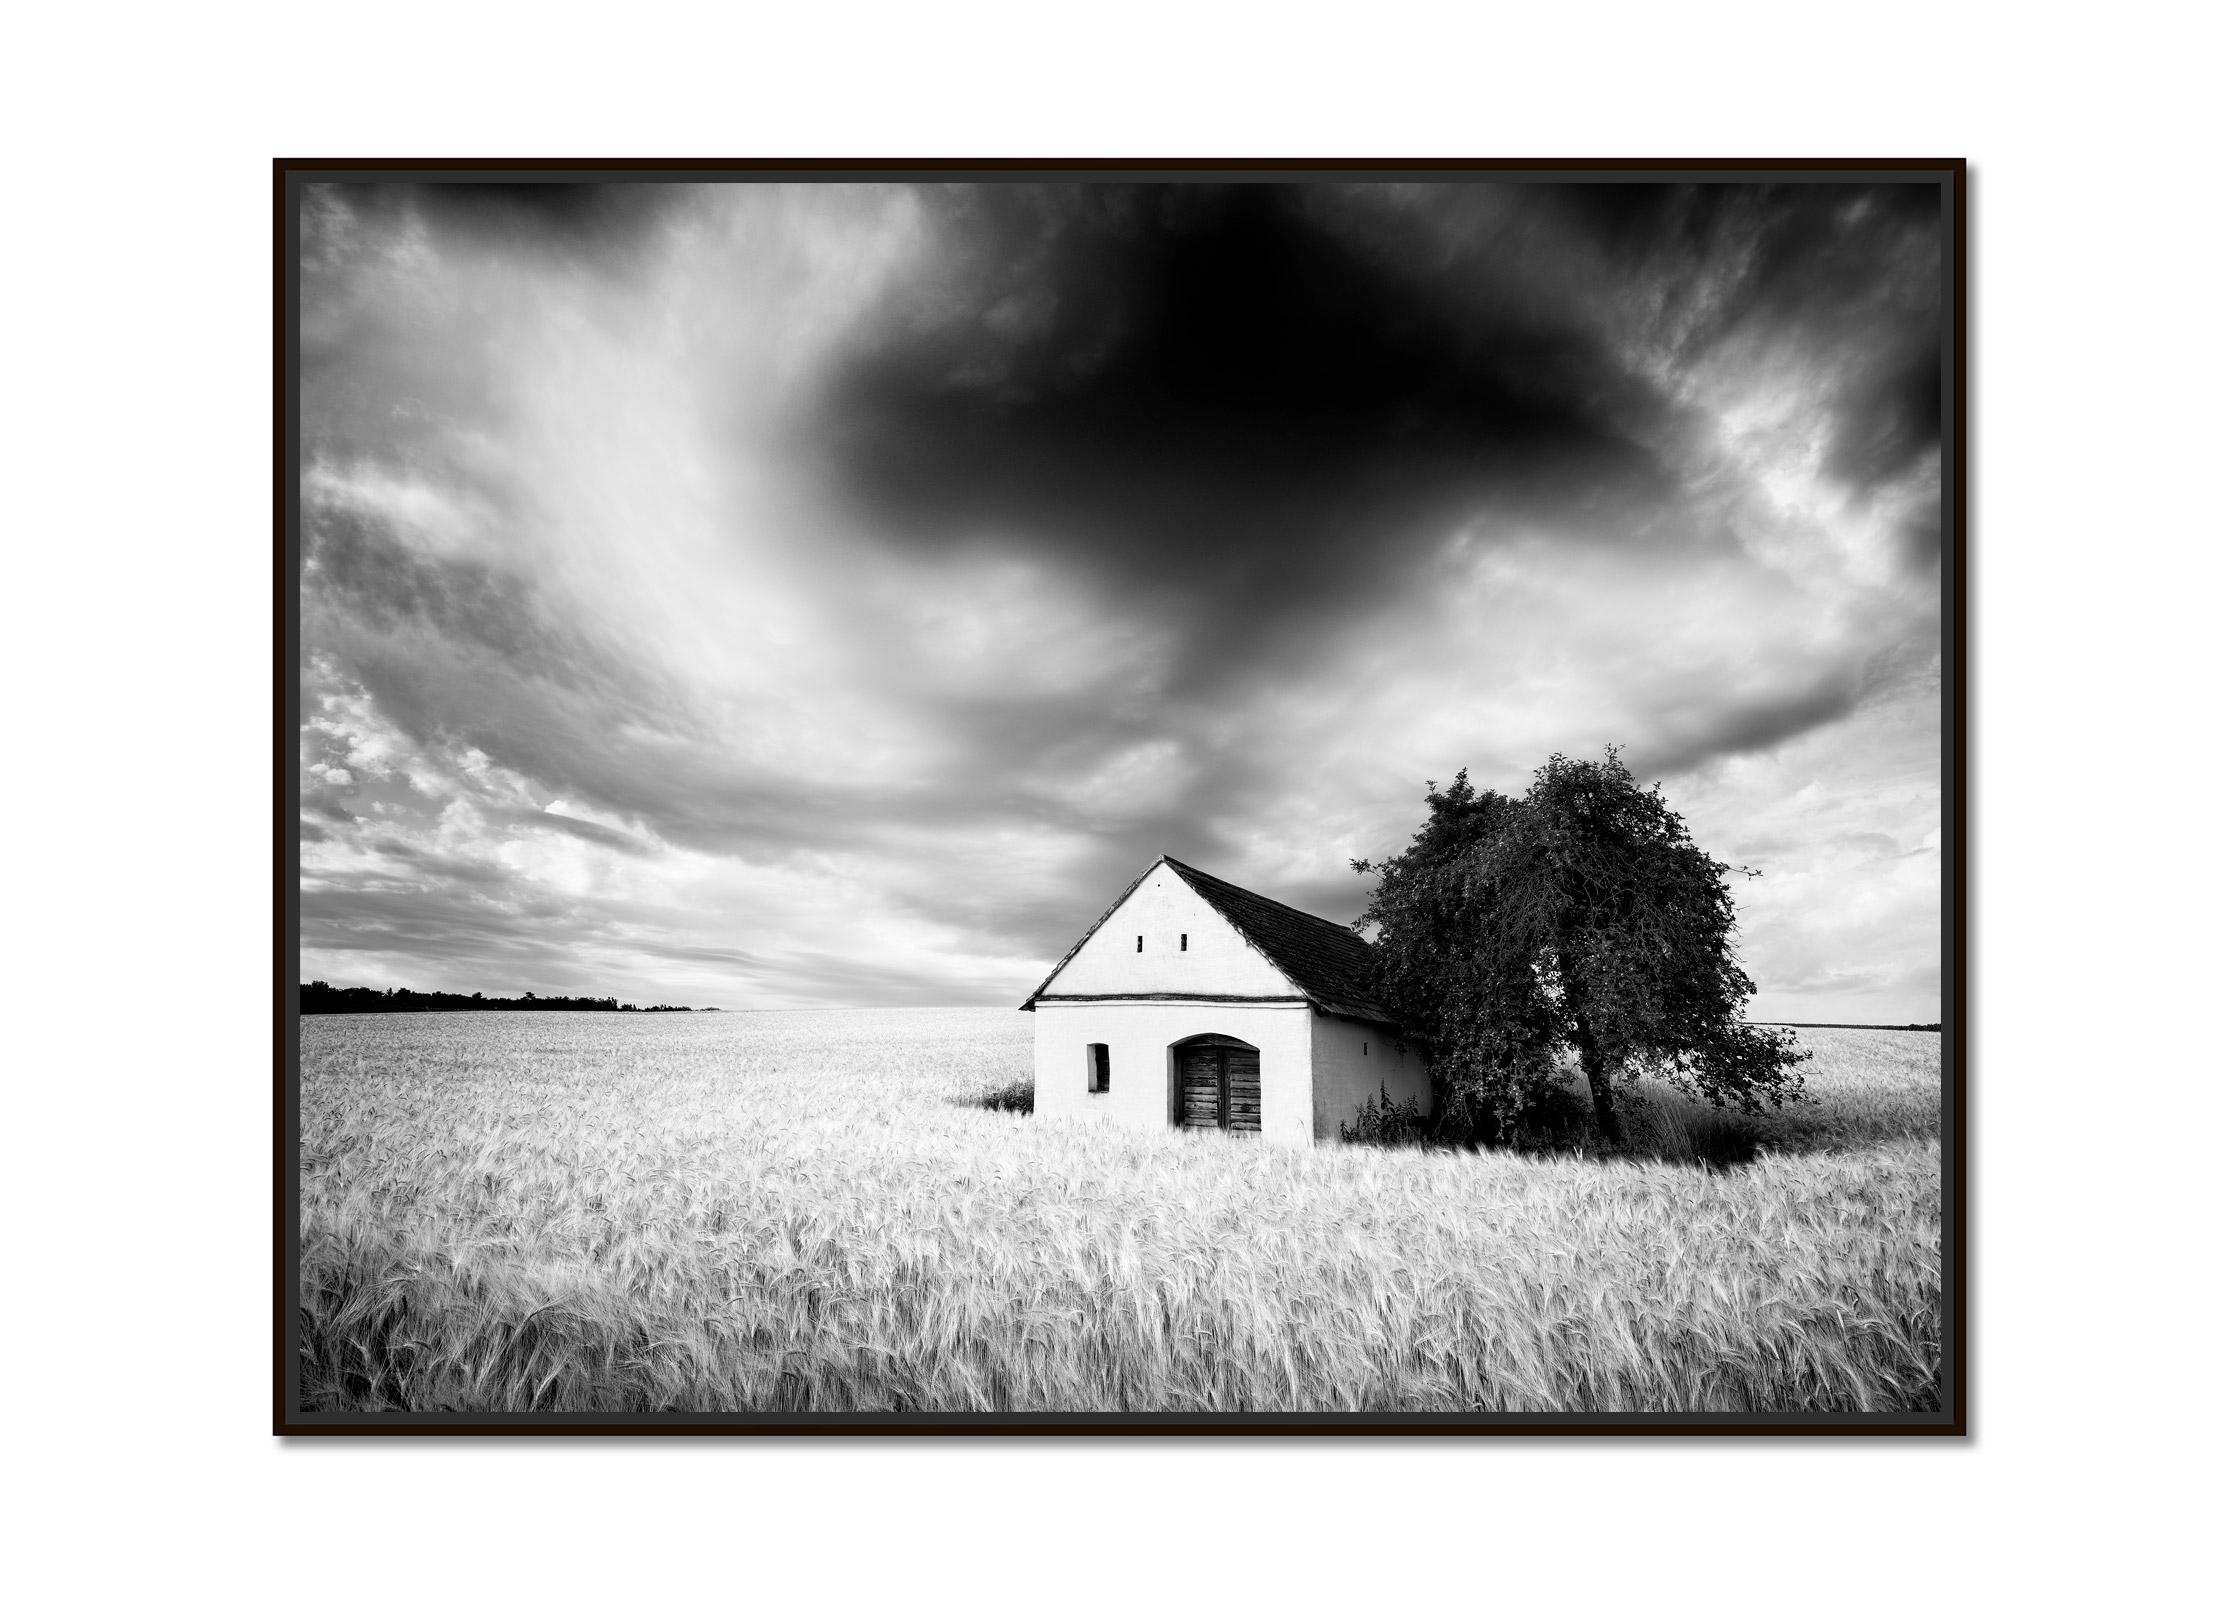 Wine Press House, wheat field, heavy clouds, black & white landscape photography - Photograph by Gerald Berghammer